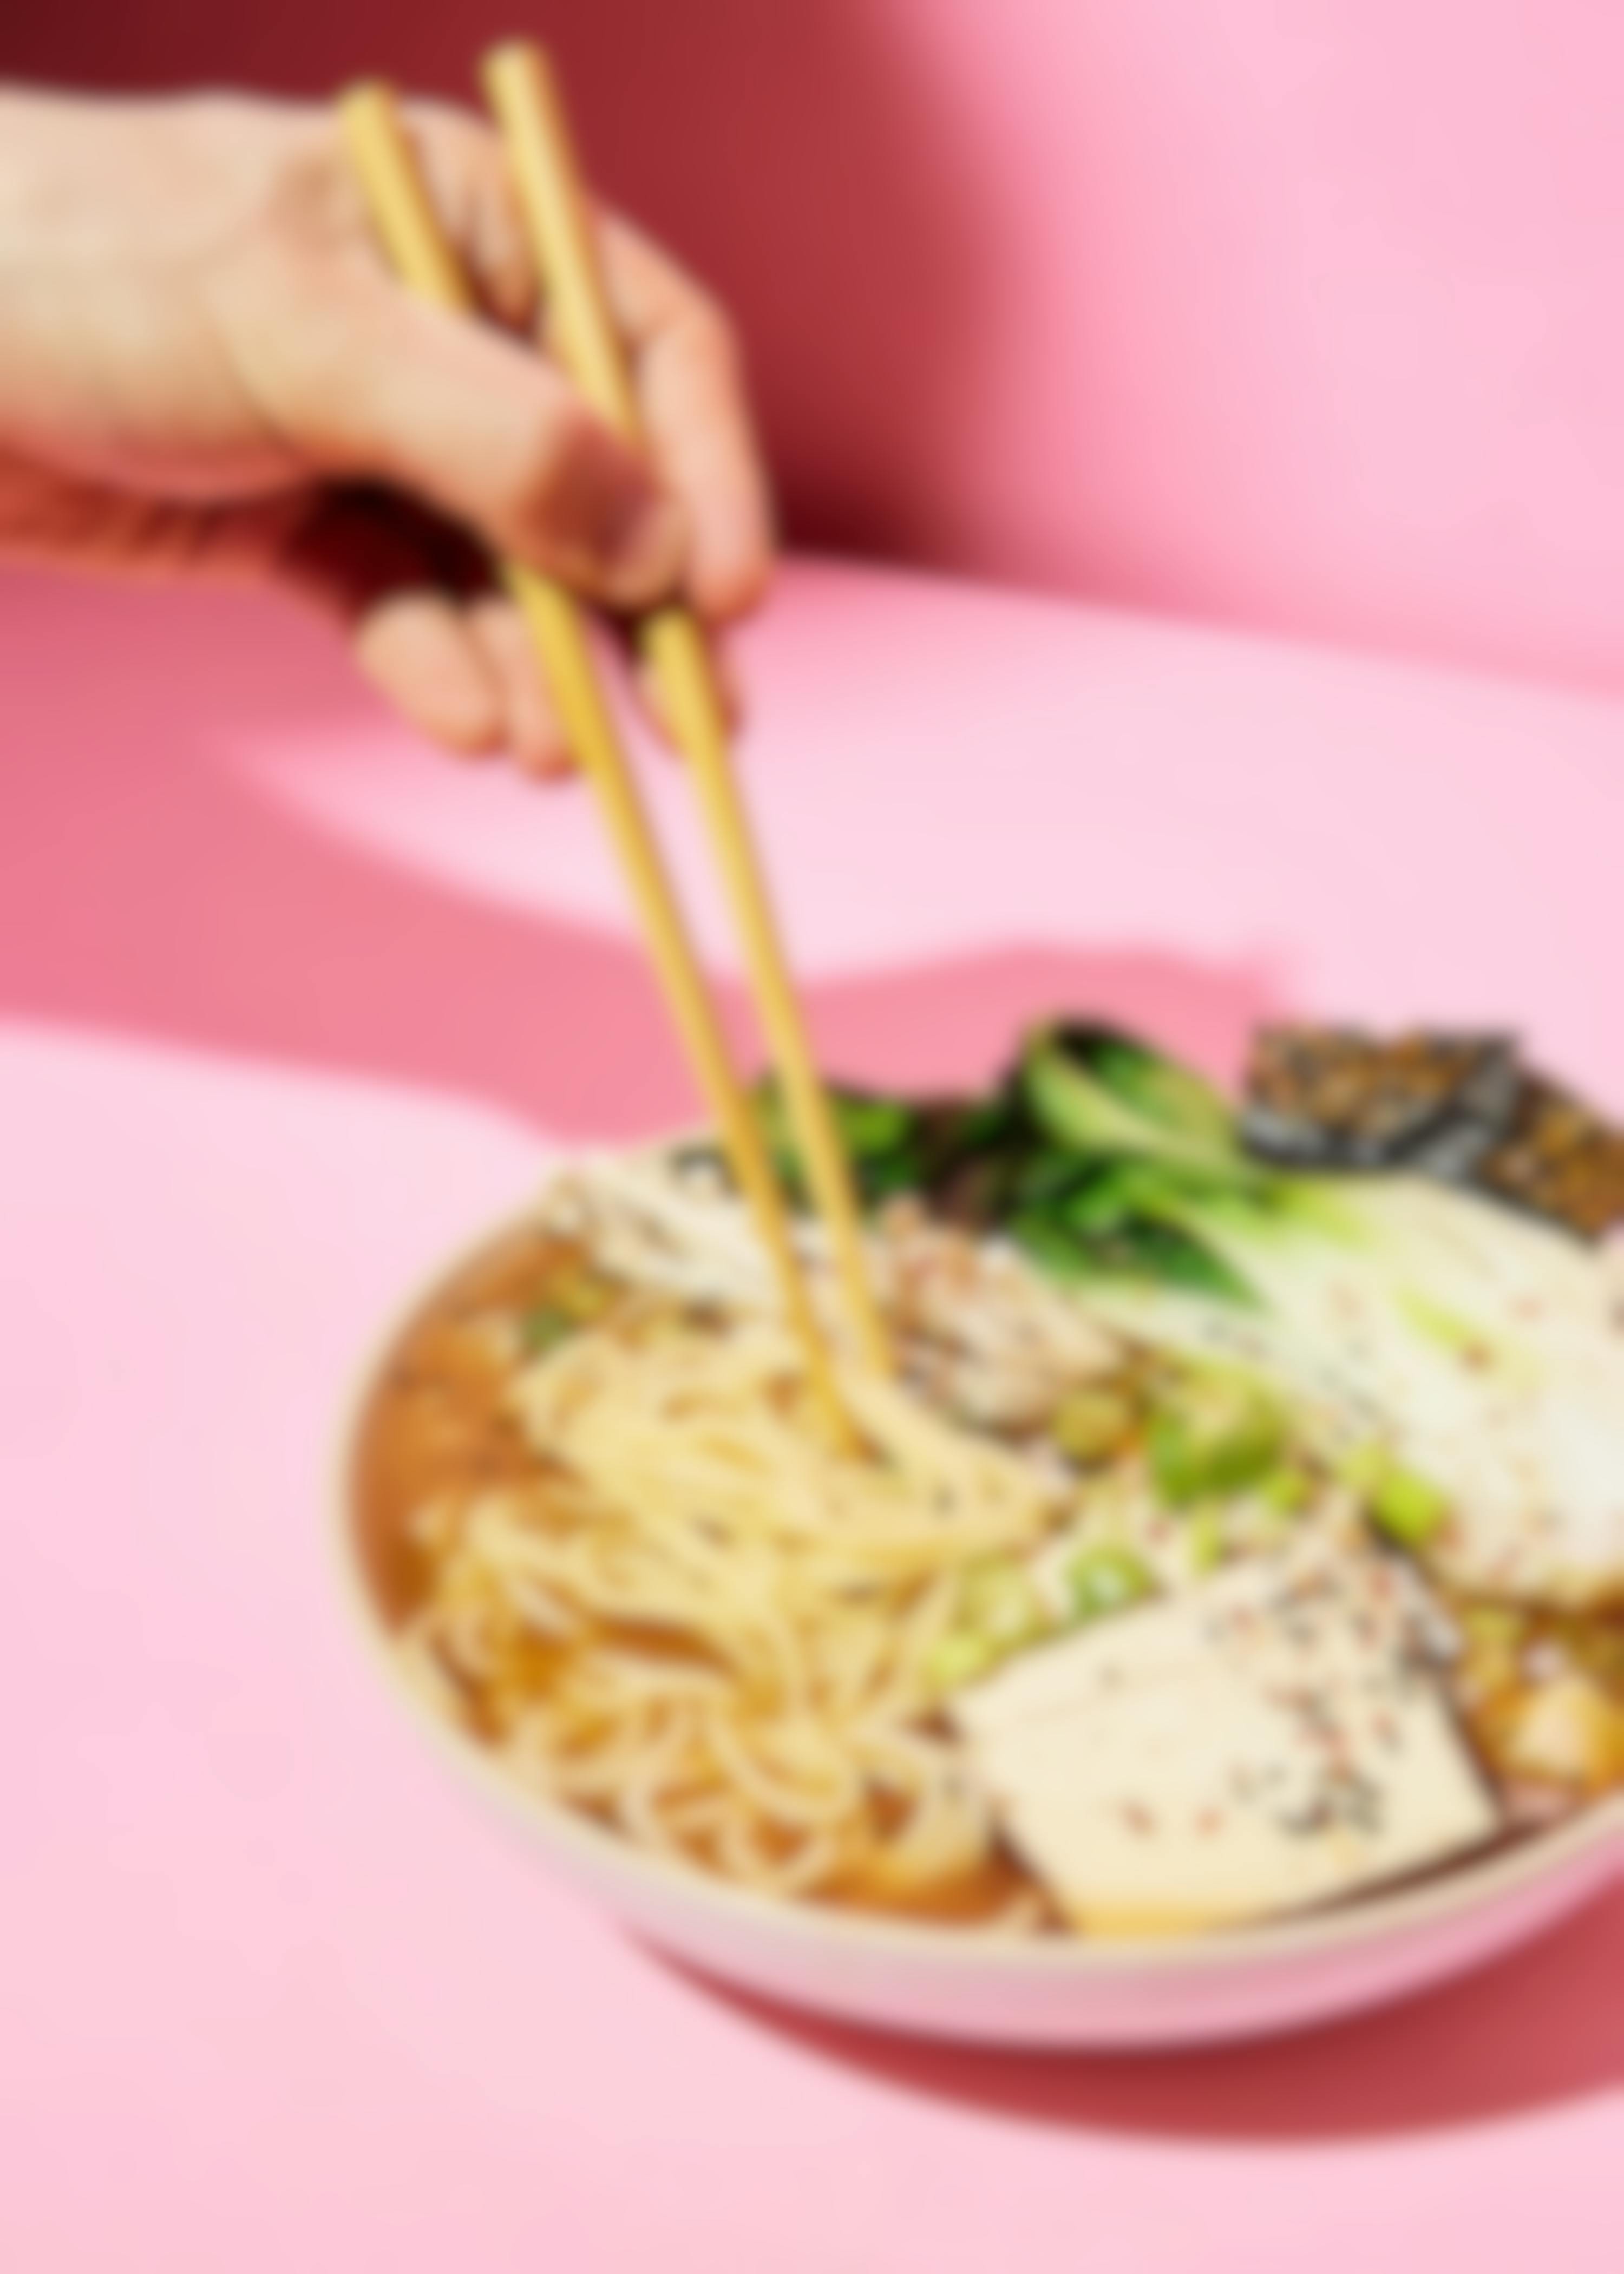 Warming flavors: vegan phở with our Mühlen fillet